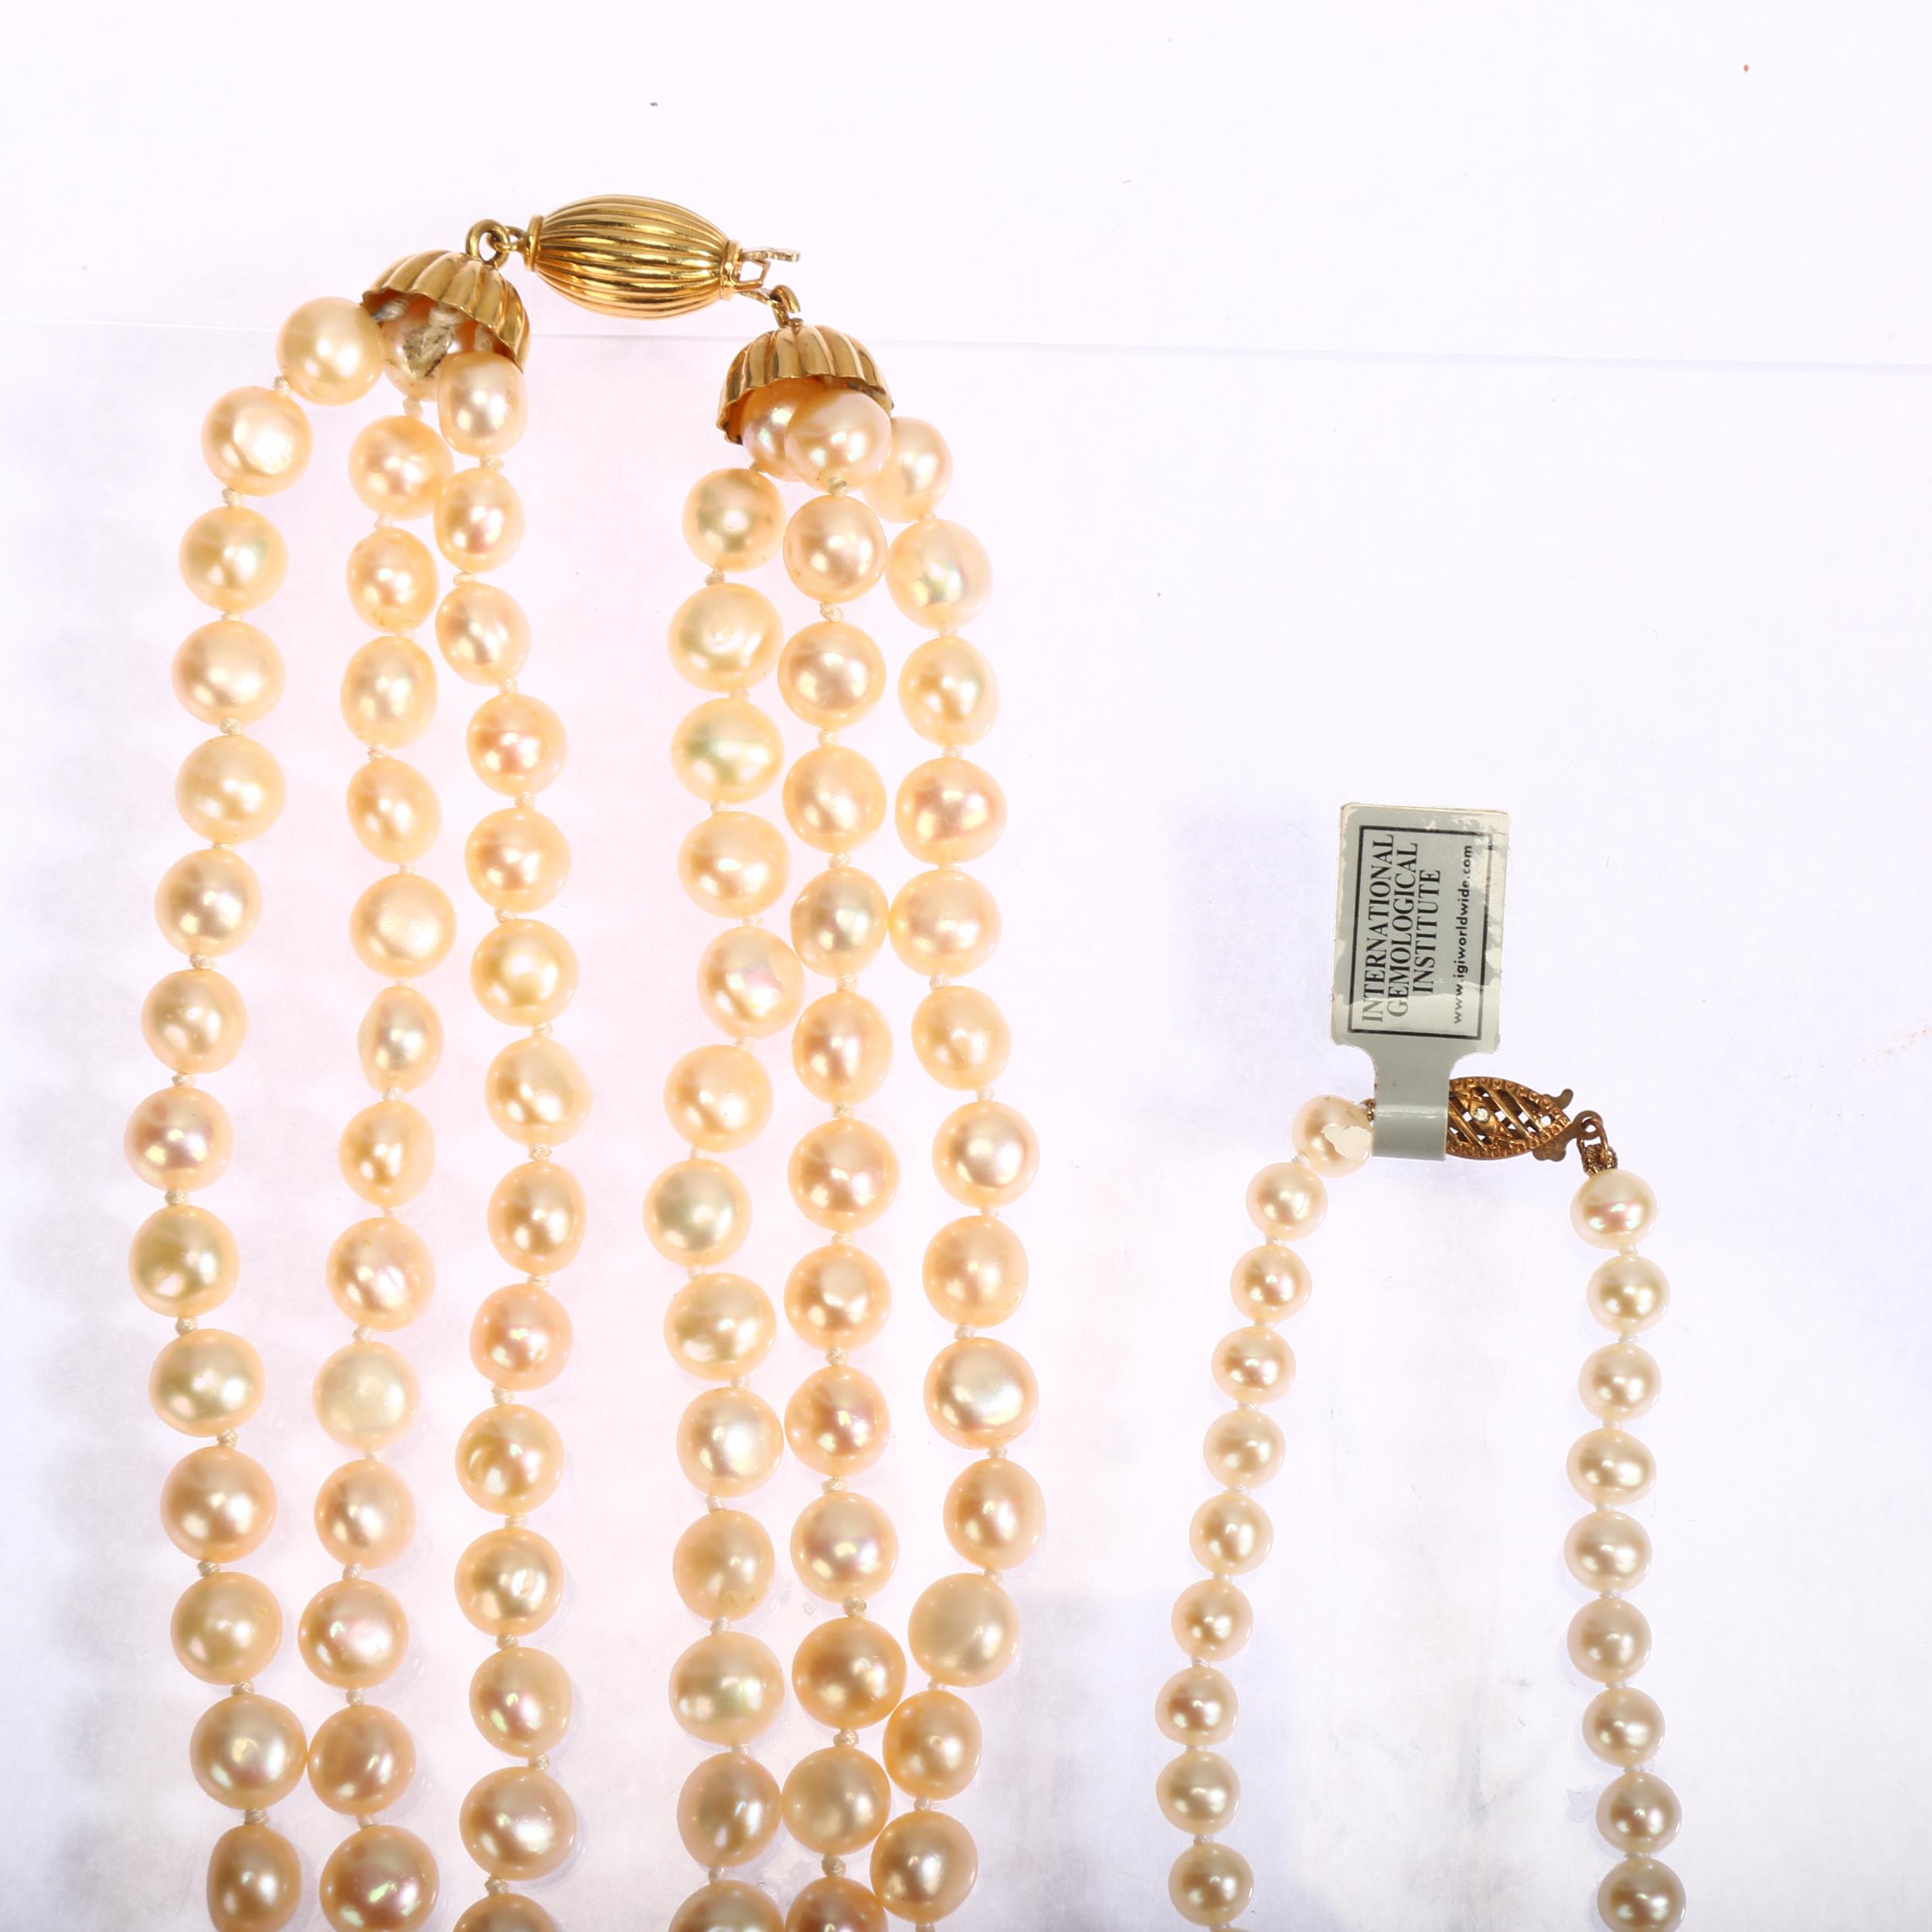 A triple-strand cultured pearl bead necklace, with 18ct barrel clasp, length 50cm, and a single- - Image 3 of 3